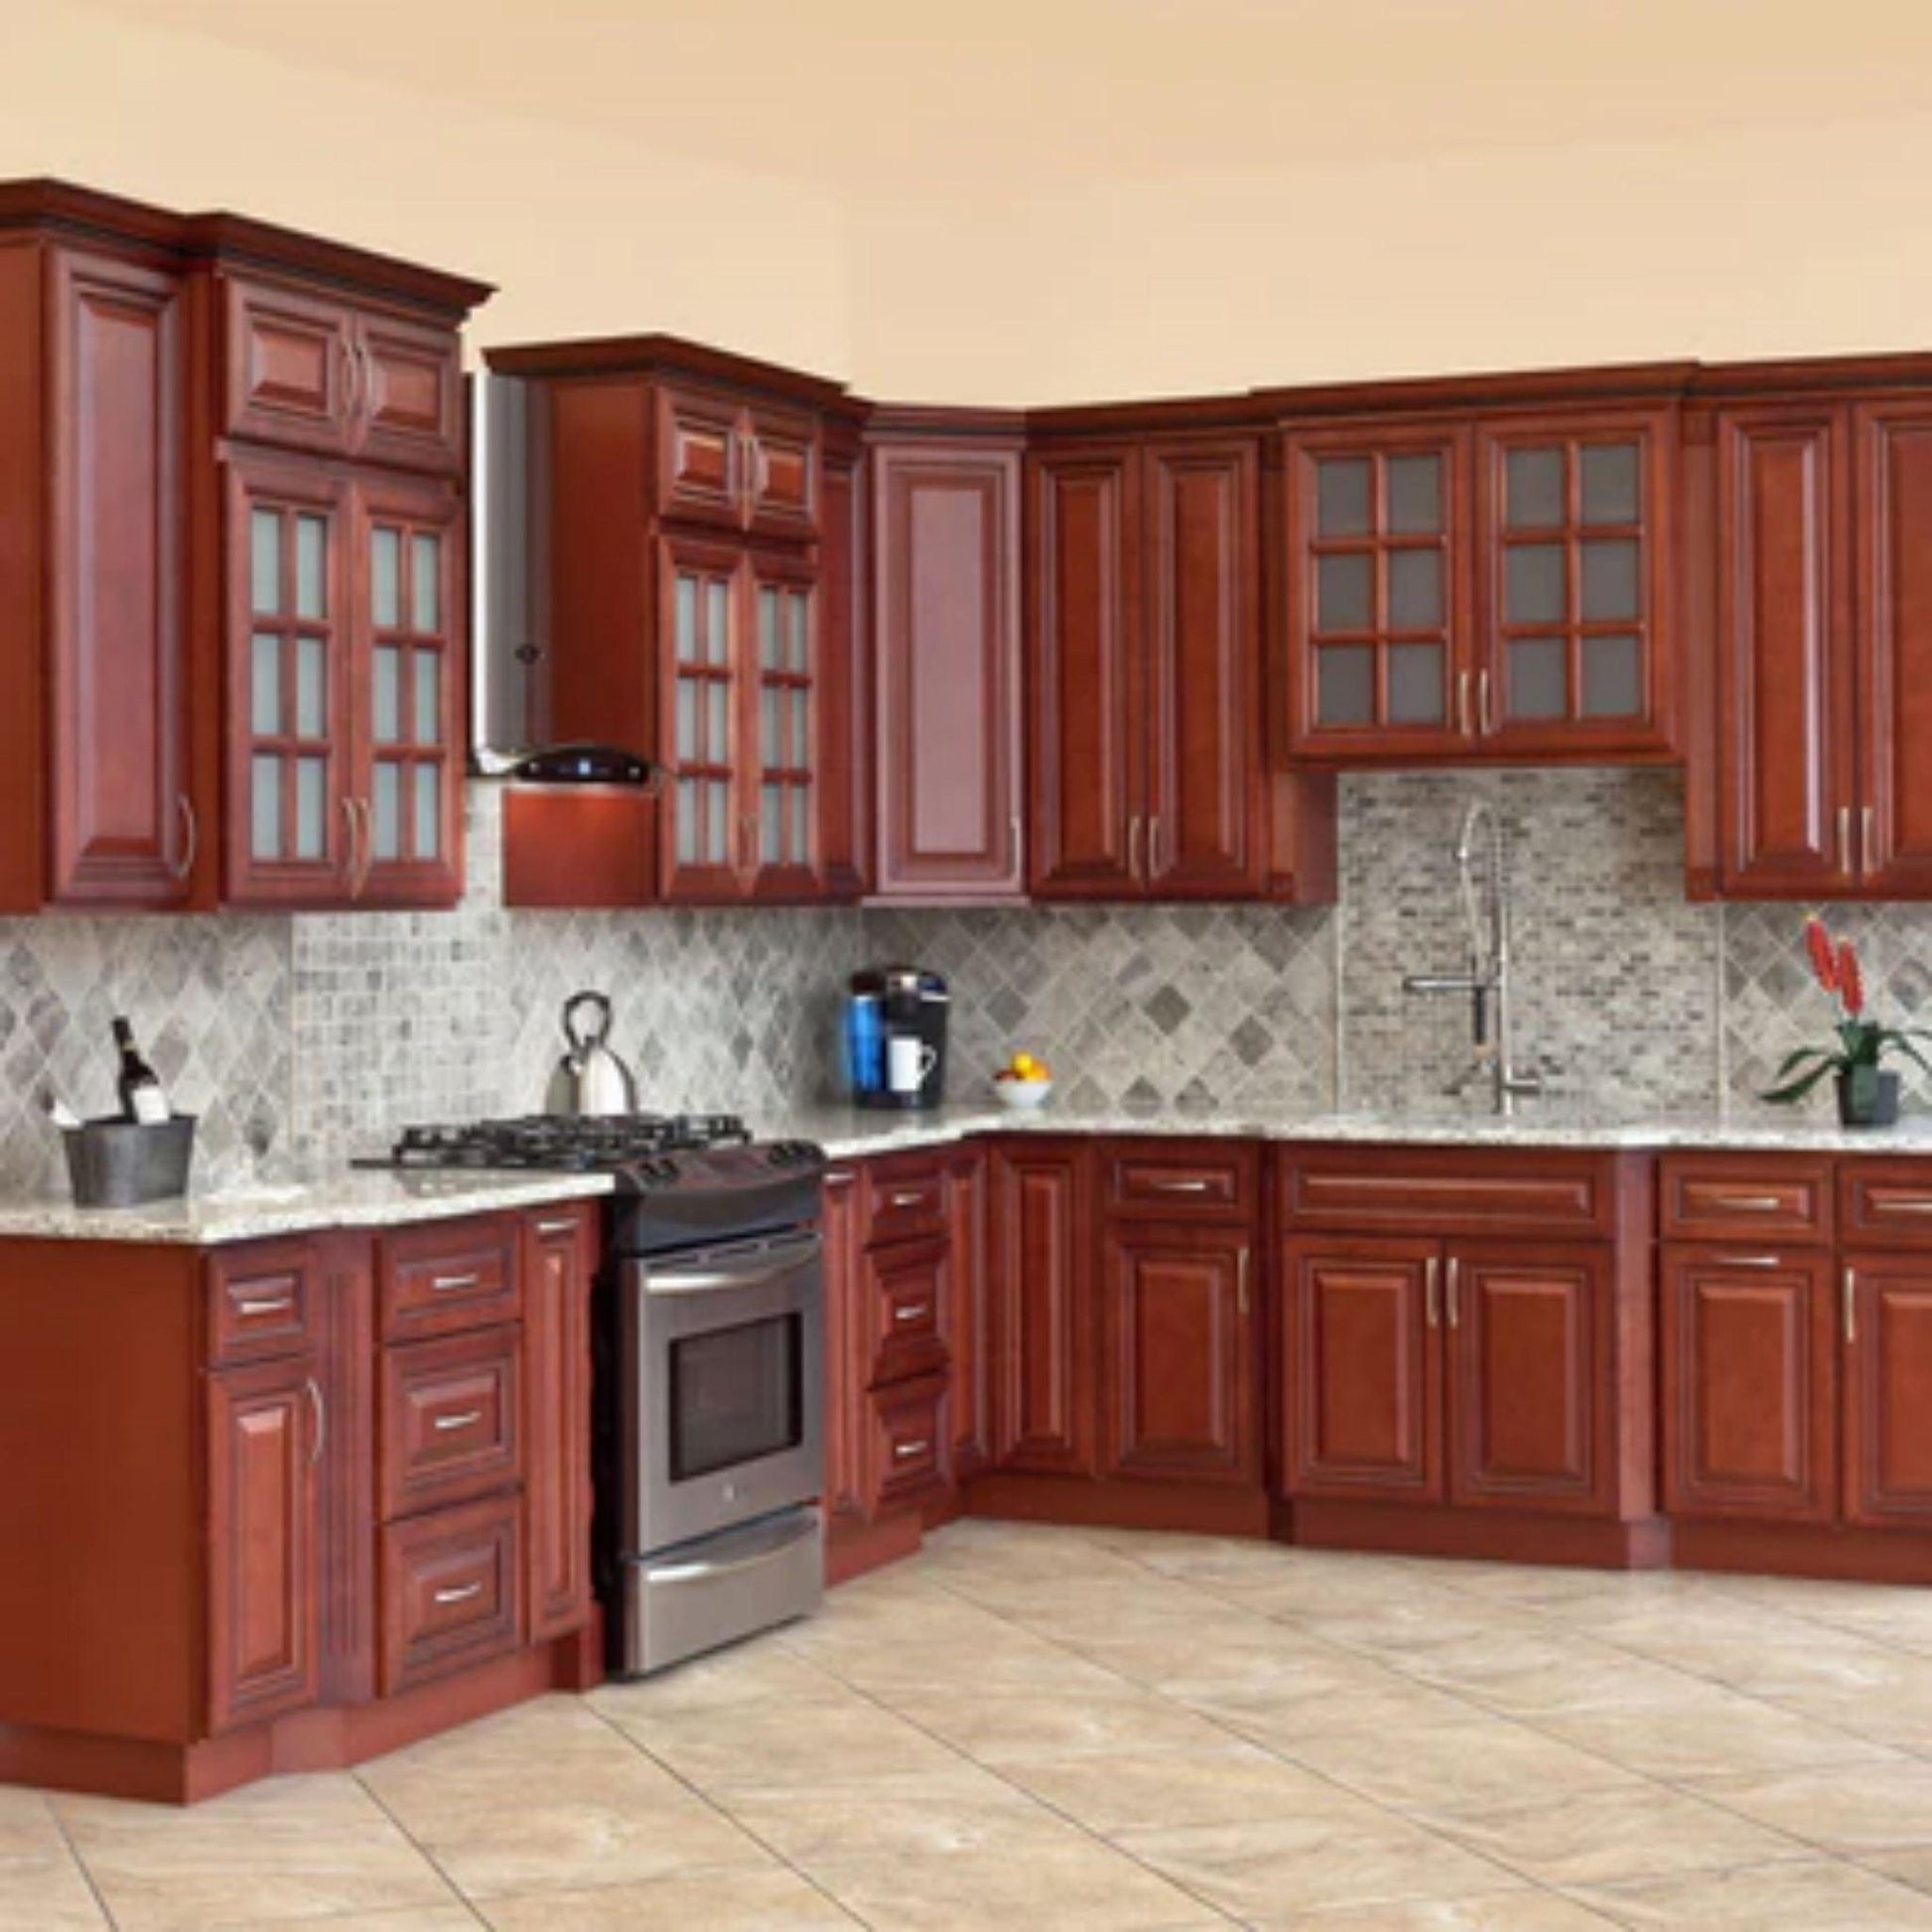 Paper towel holder wall under cabinet Red Mahagony